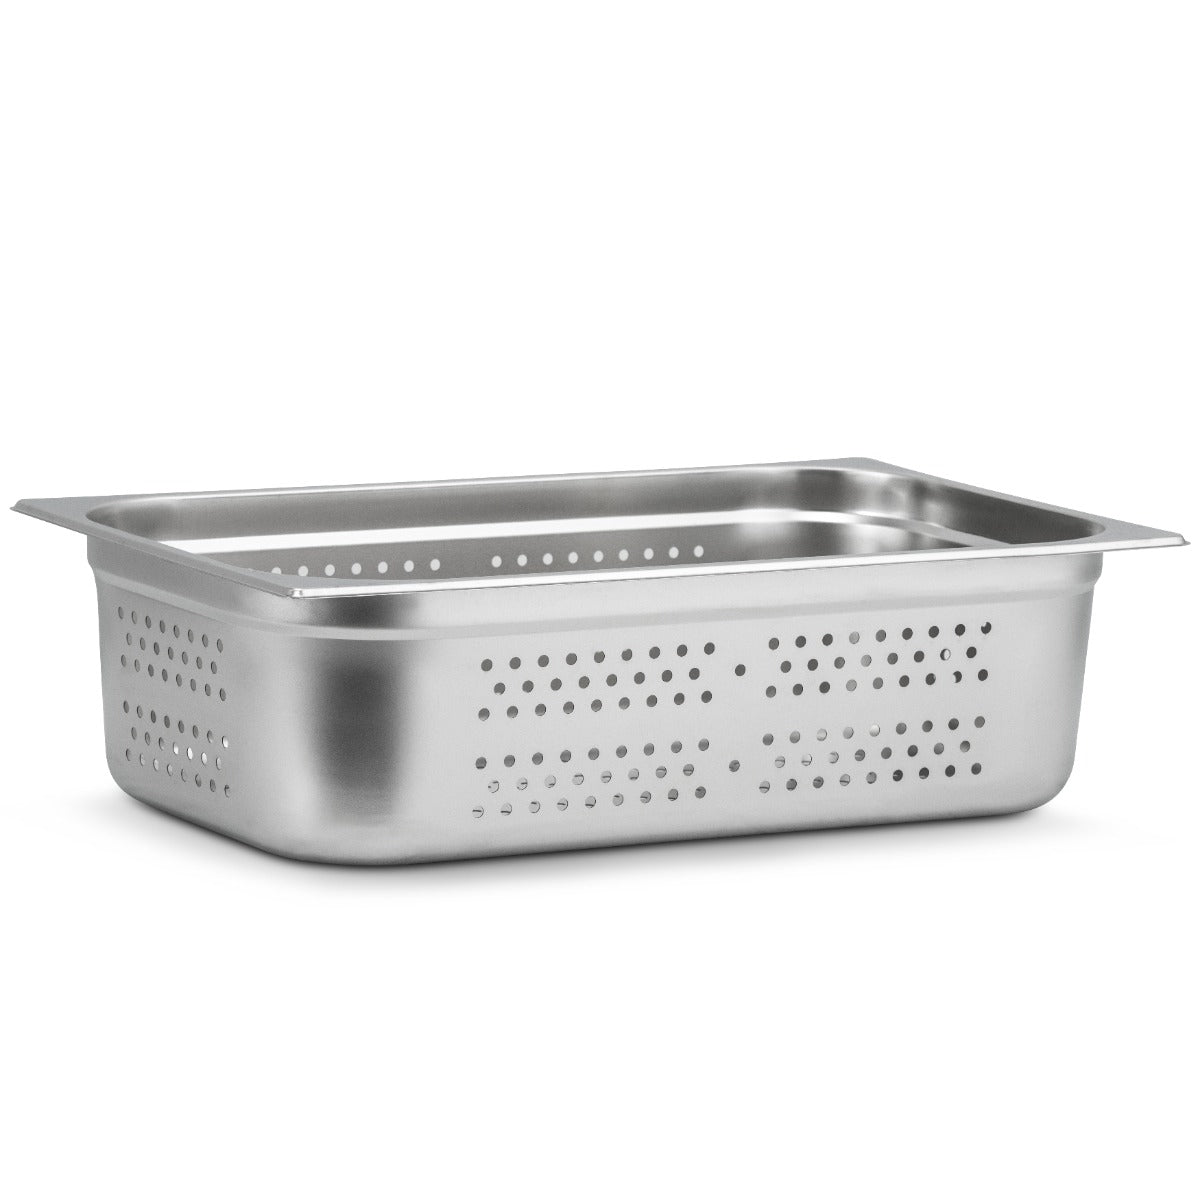 Blizzard Perforated Stainless Steel Gastronorm Pan